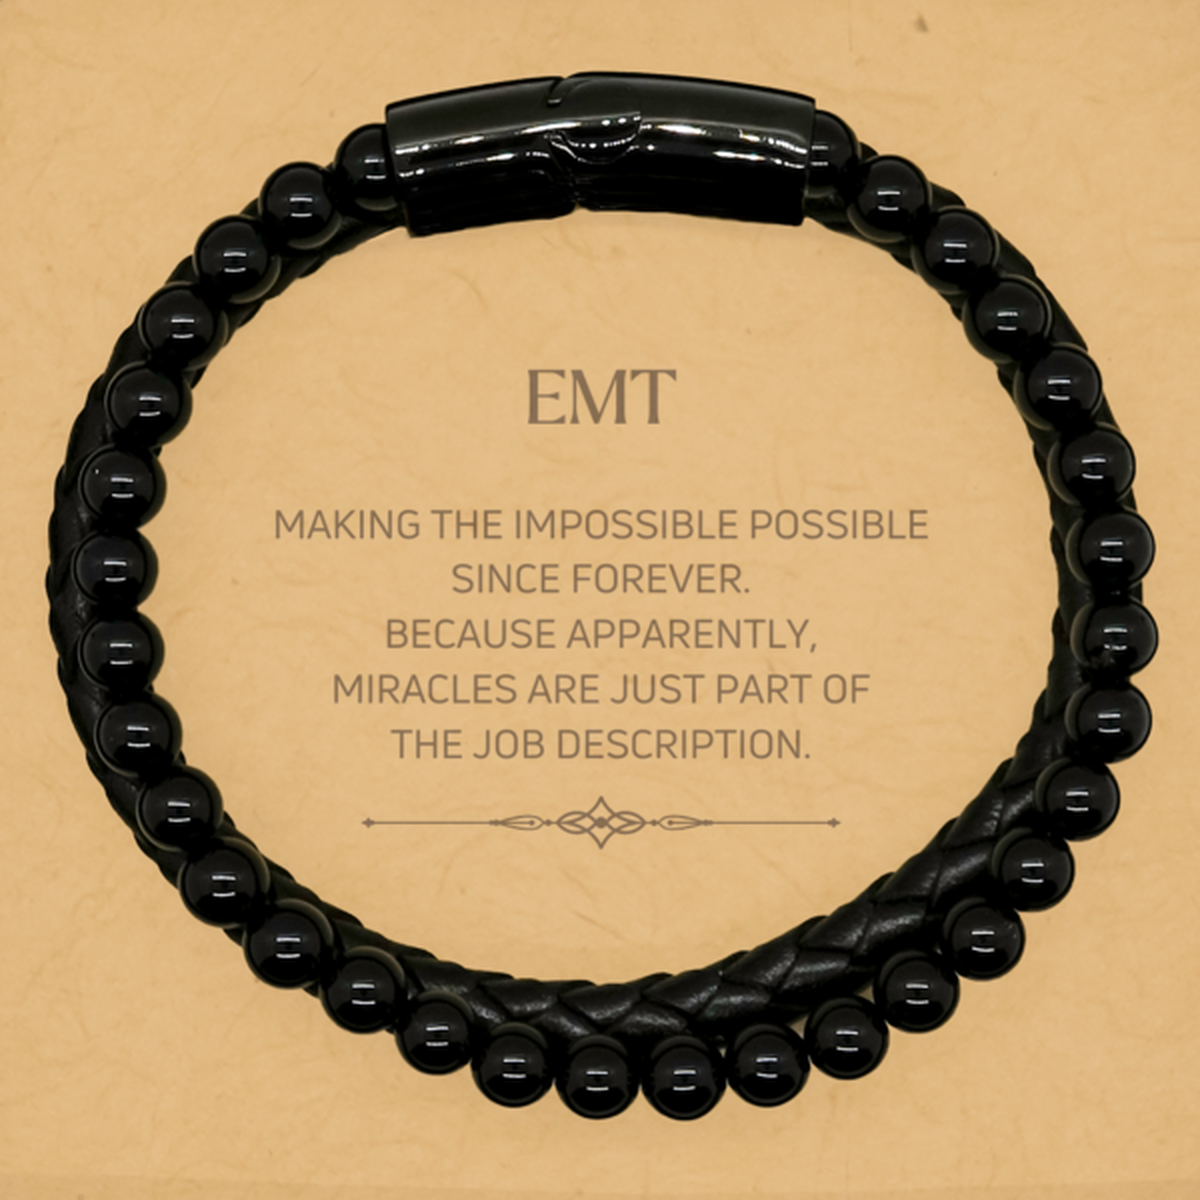 Funny EMT Gifts, Miracles are just part of the job description, Inspirational Birthday Stone Leather Bracelets For EMT, Men, Women, Coworkers, Friends, Boss